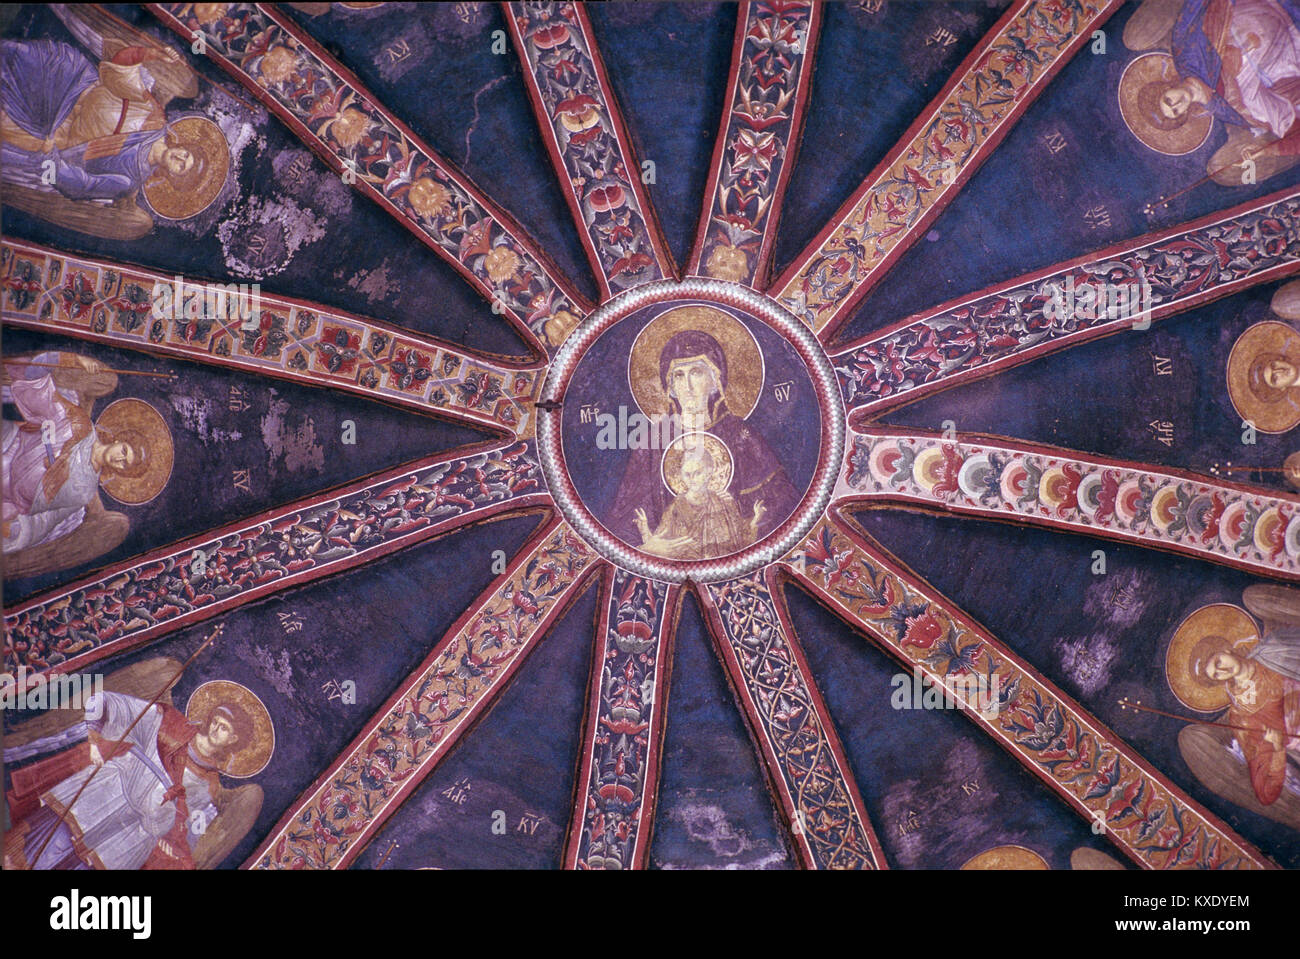 Byzantine Fresco of Virgin Mary and Child or Infant Jesus Surrounded by Angels in the West Dome of the Side Chapel of the Byzantine Greek Orthodox Chora Church or Church of the Holy Saviour in Chora, Istanbul, Turkey Stock Photo